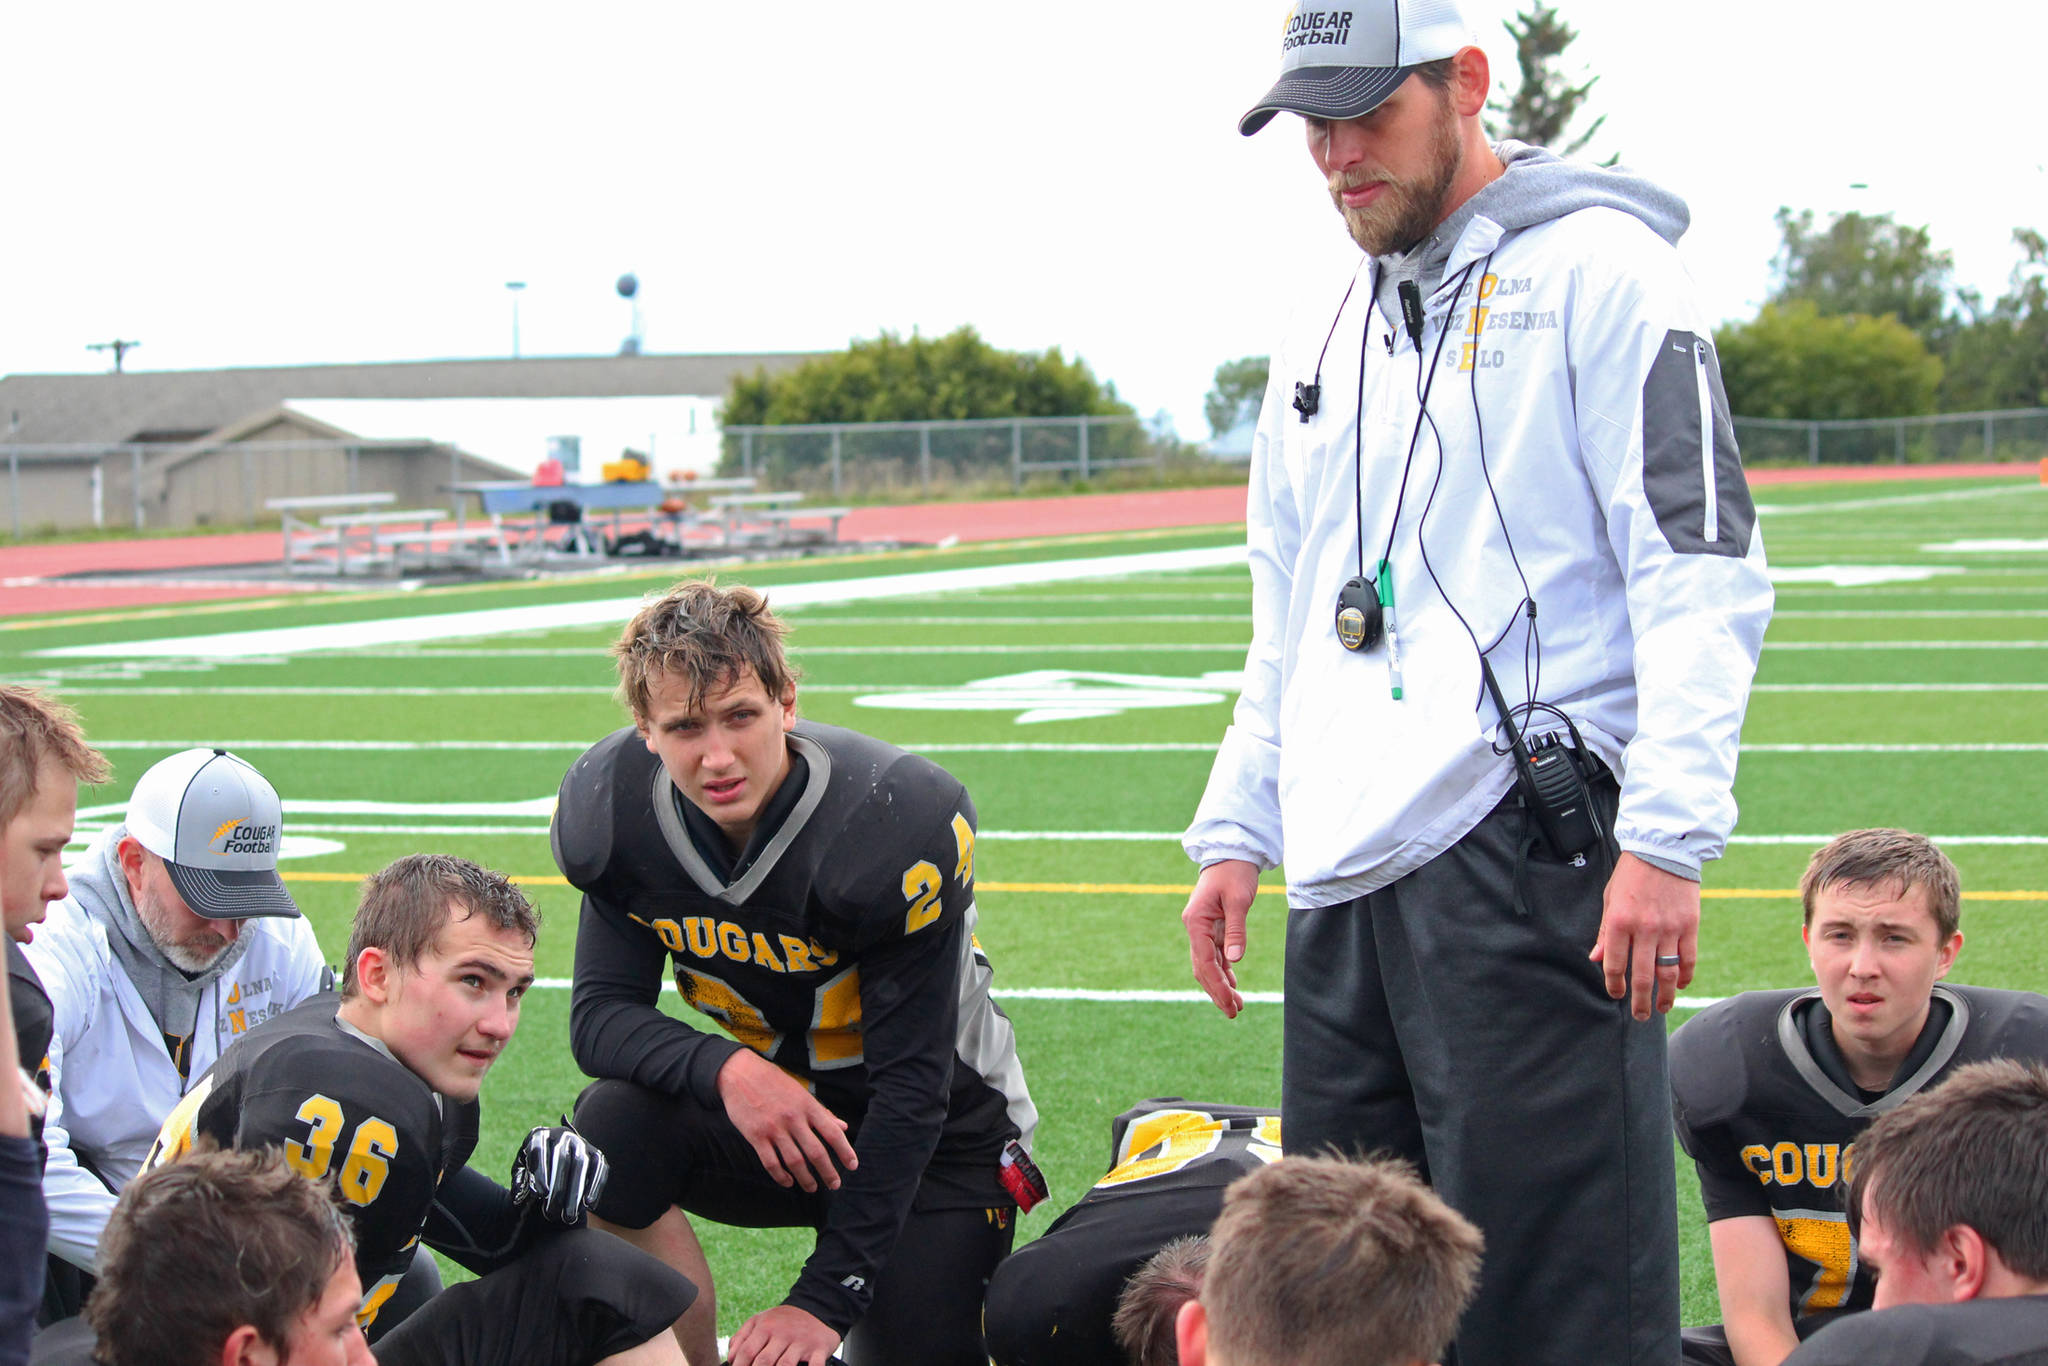 Head Coach Justin Zank counsels the Cougar football team, including junior Kalinik Reutov, left, sophomore Zasima Martushev, center and junior Nikola Reutov, after their 18-40 loss to Nikiski High School on Saturday, Sept. 2, 2017 in Homer, Alaska. With 14 players at the game, Zank said he had the largest group that’s been assembled so far this season. (Photo by Megan Pacer/Homer News)